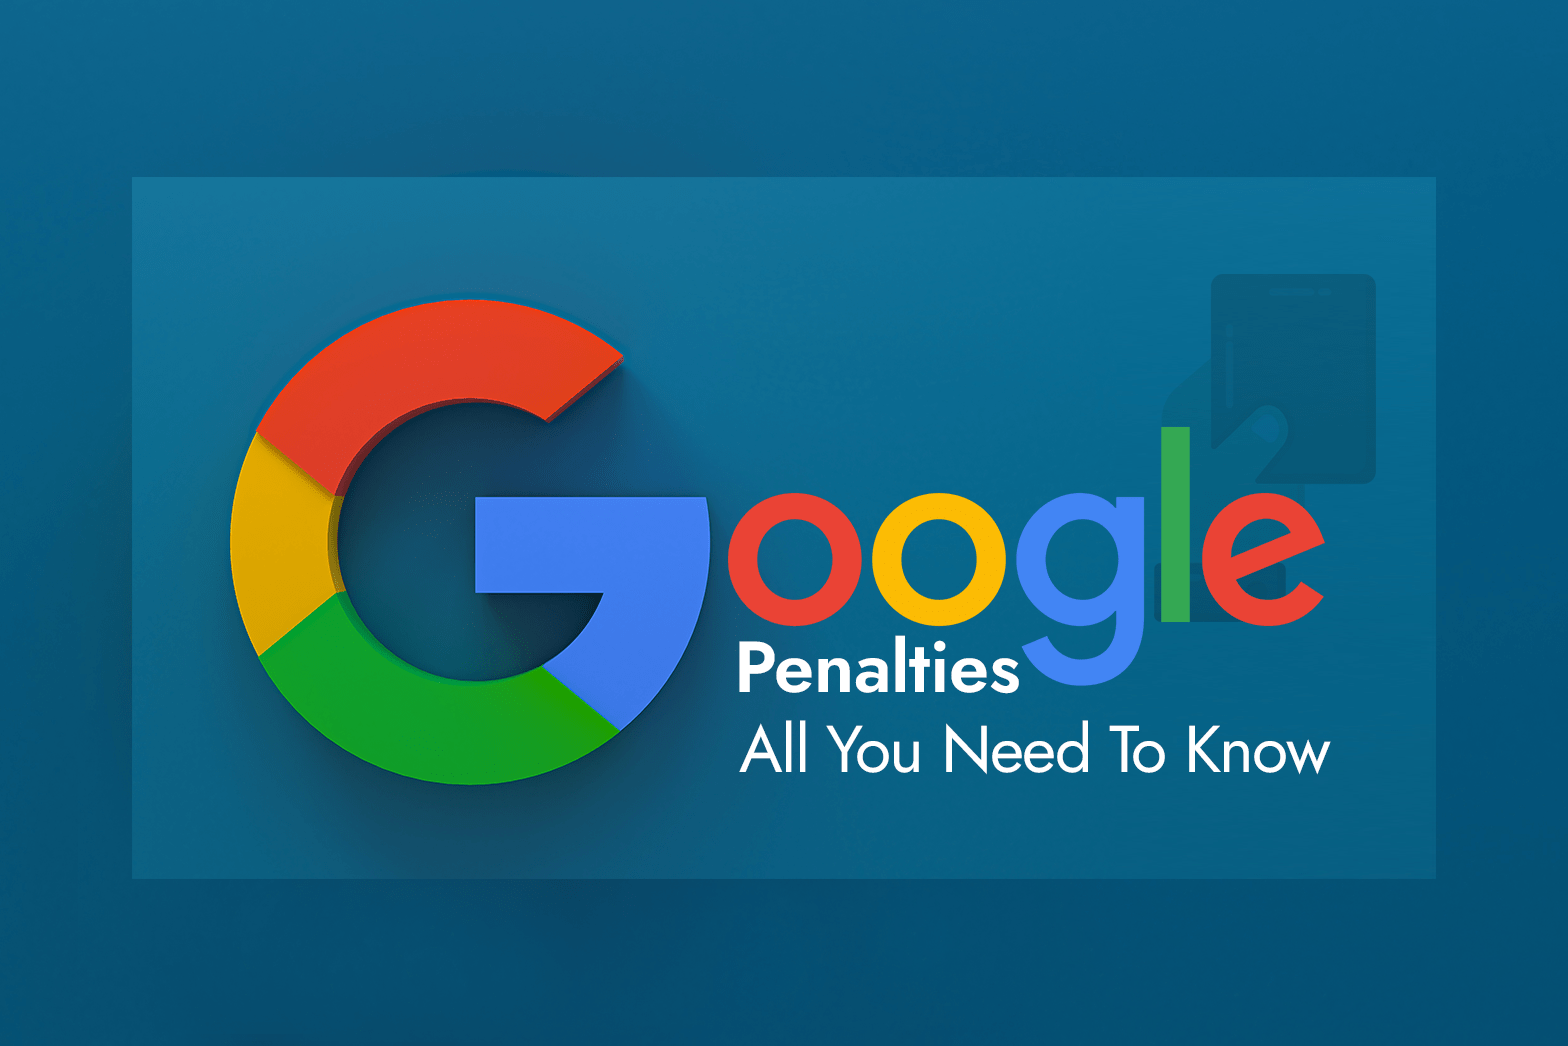 Google Penalties: All You Need To Know